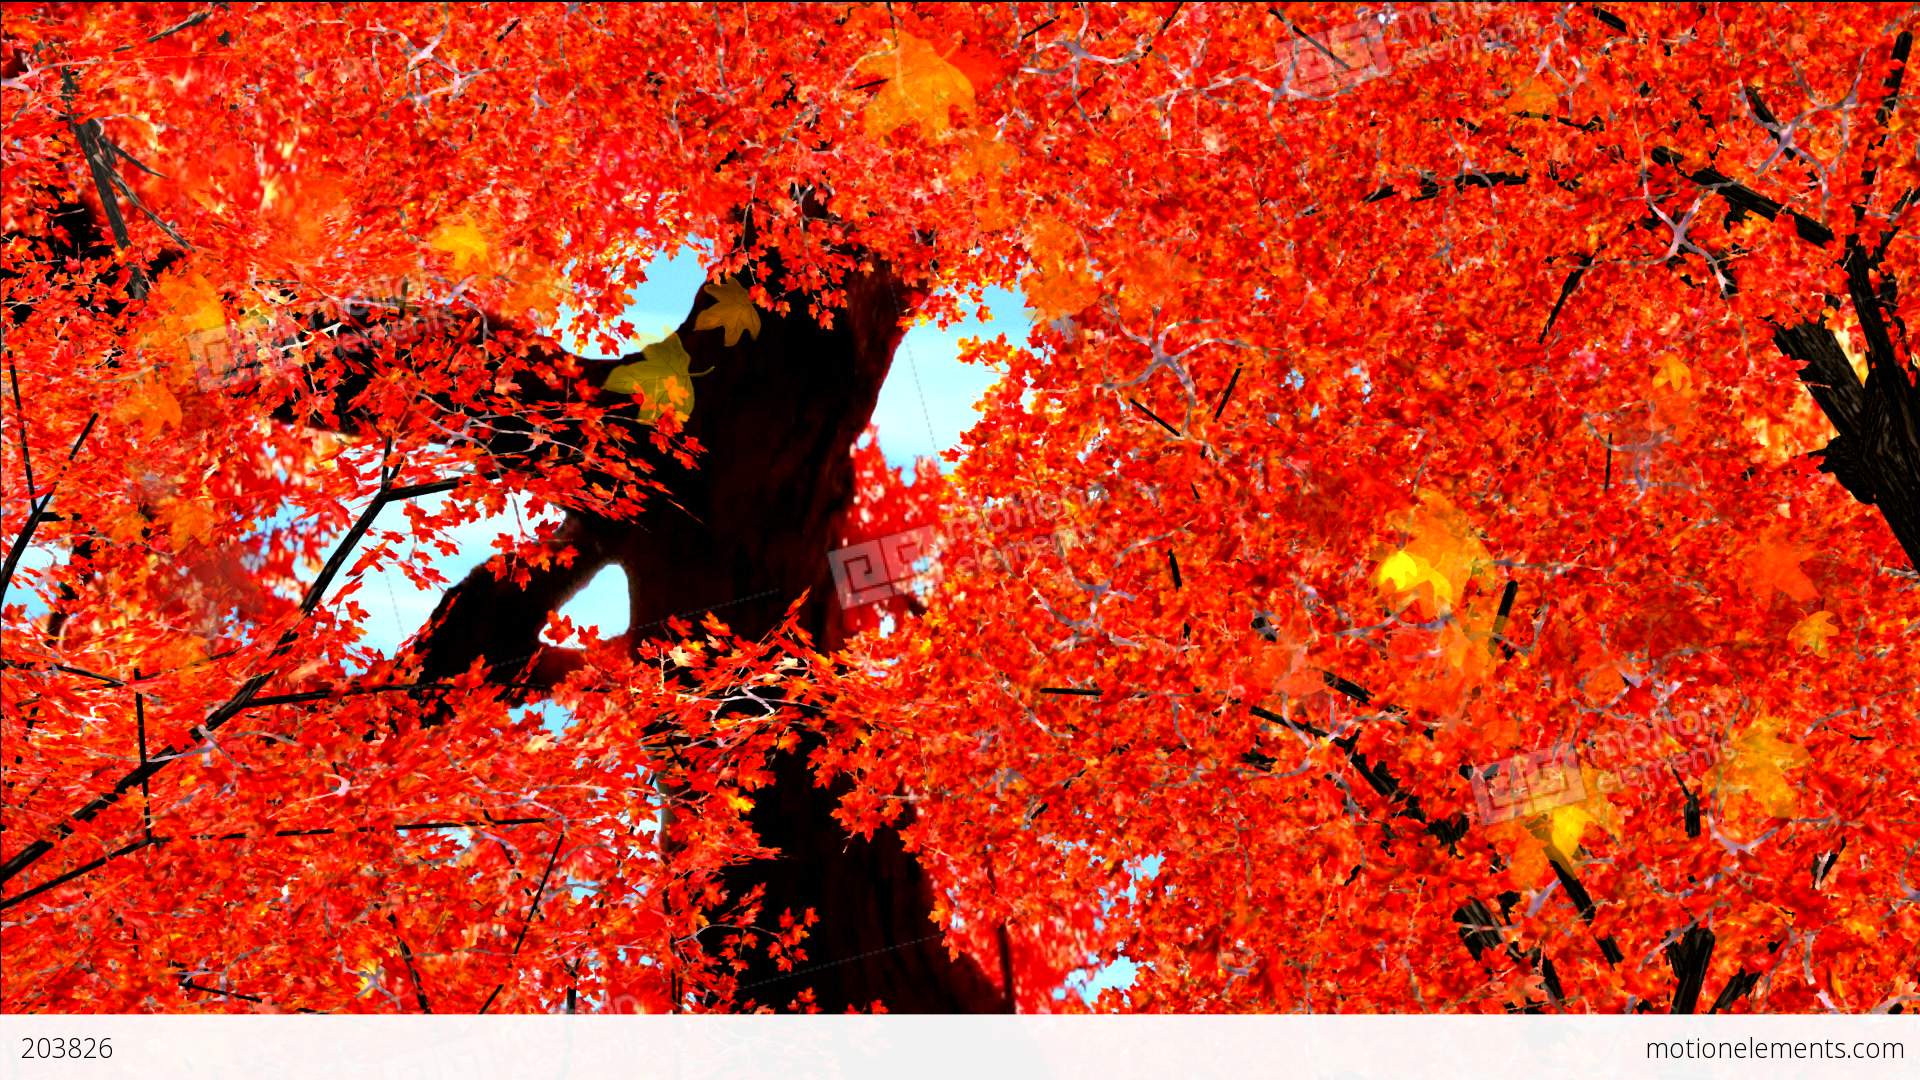 Autumn Red Leaves Falling In Wind Stock Animation | 203826